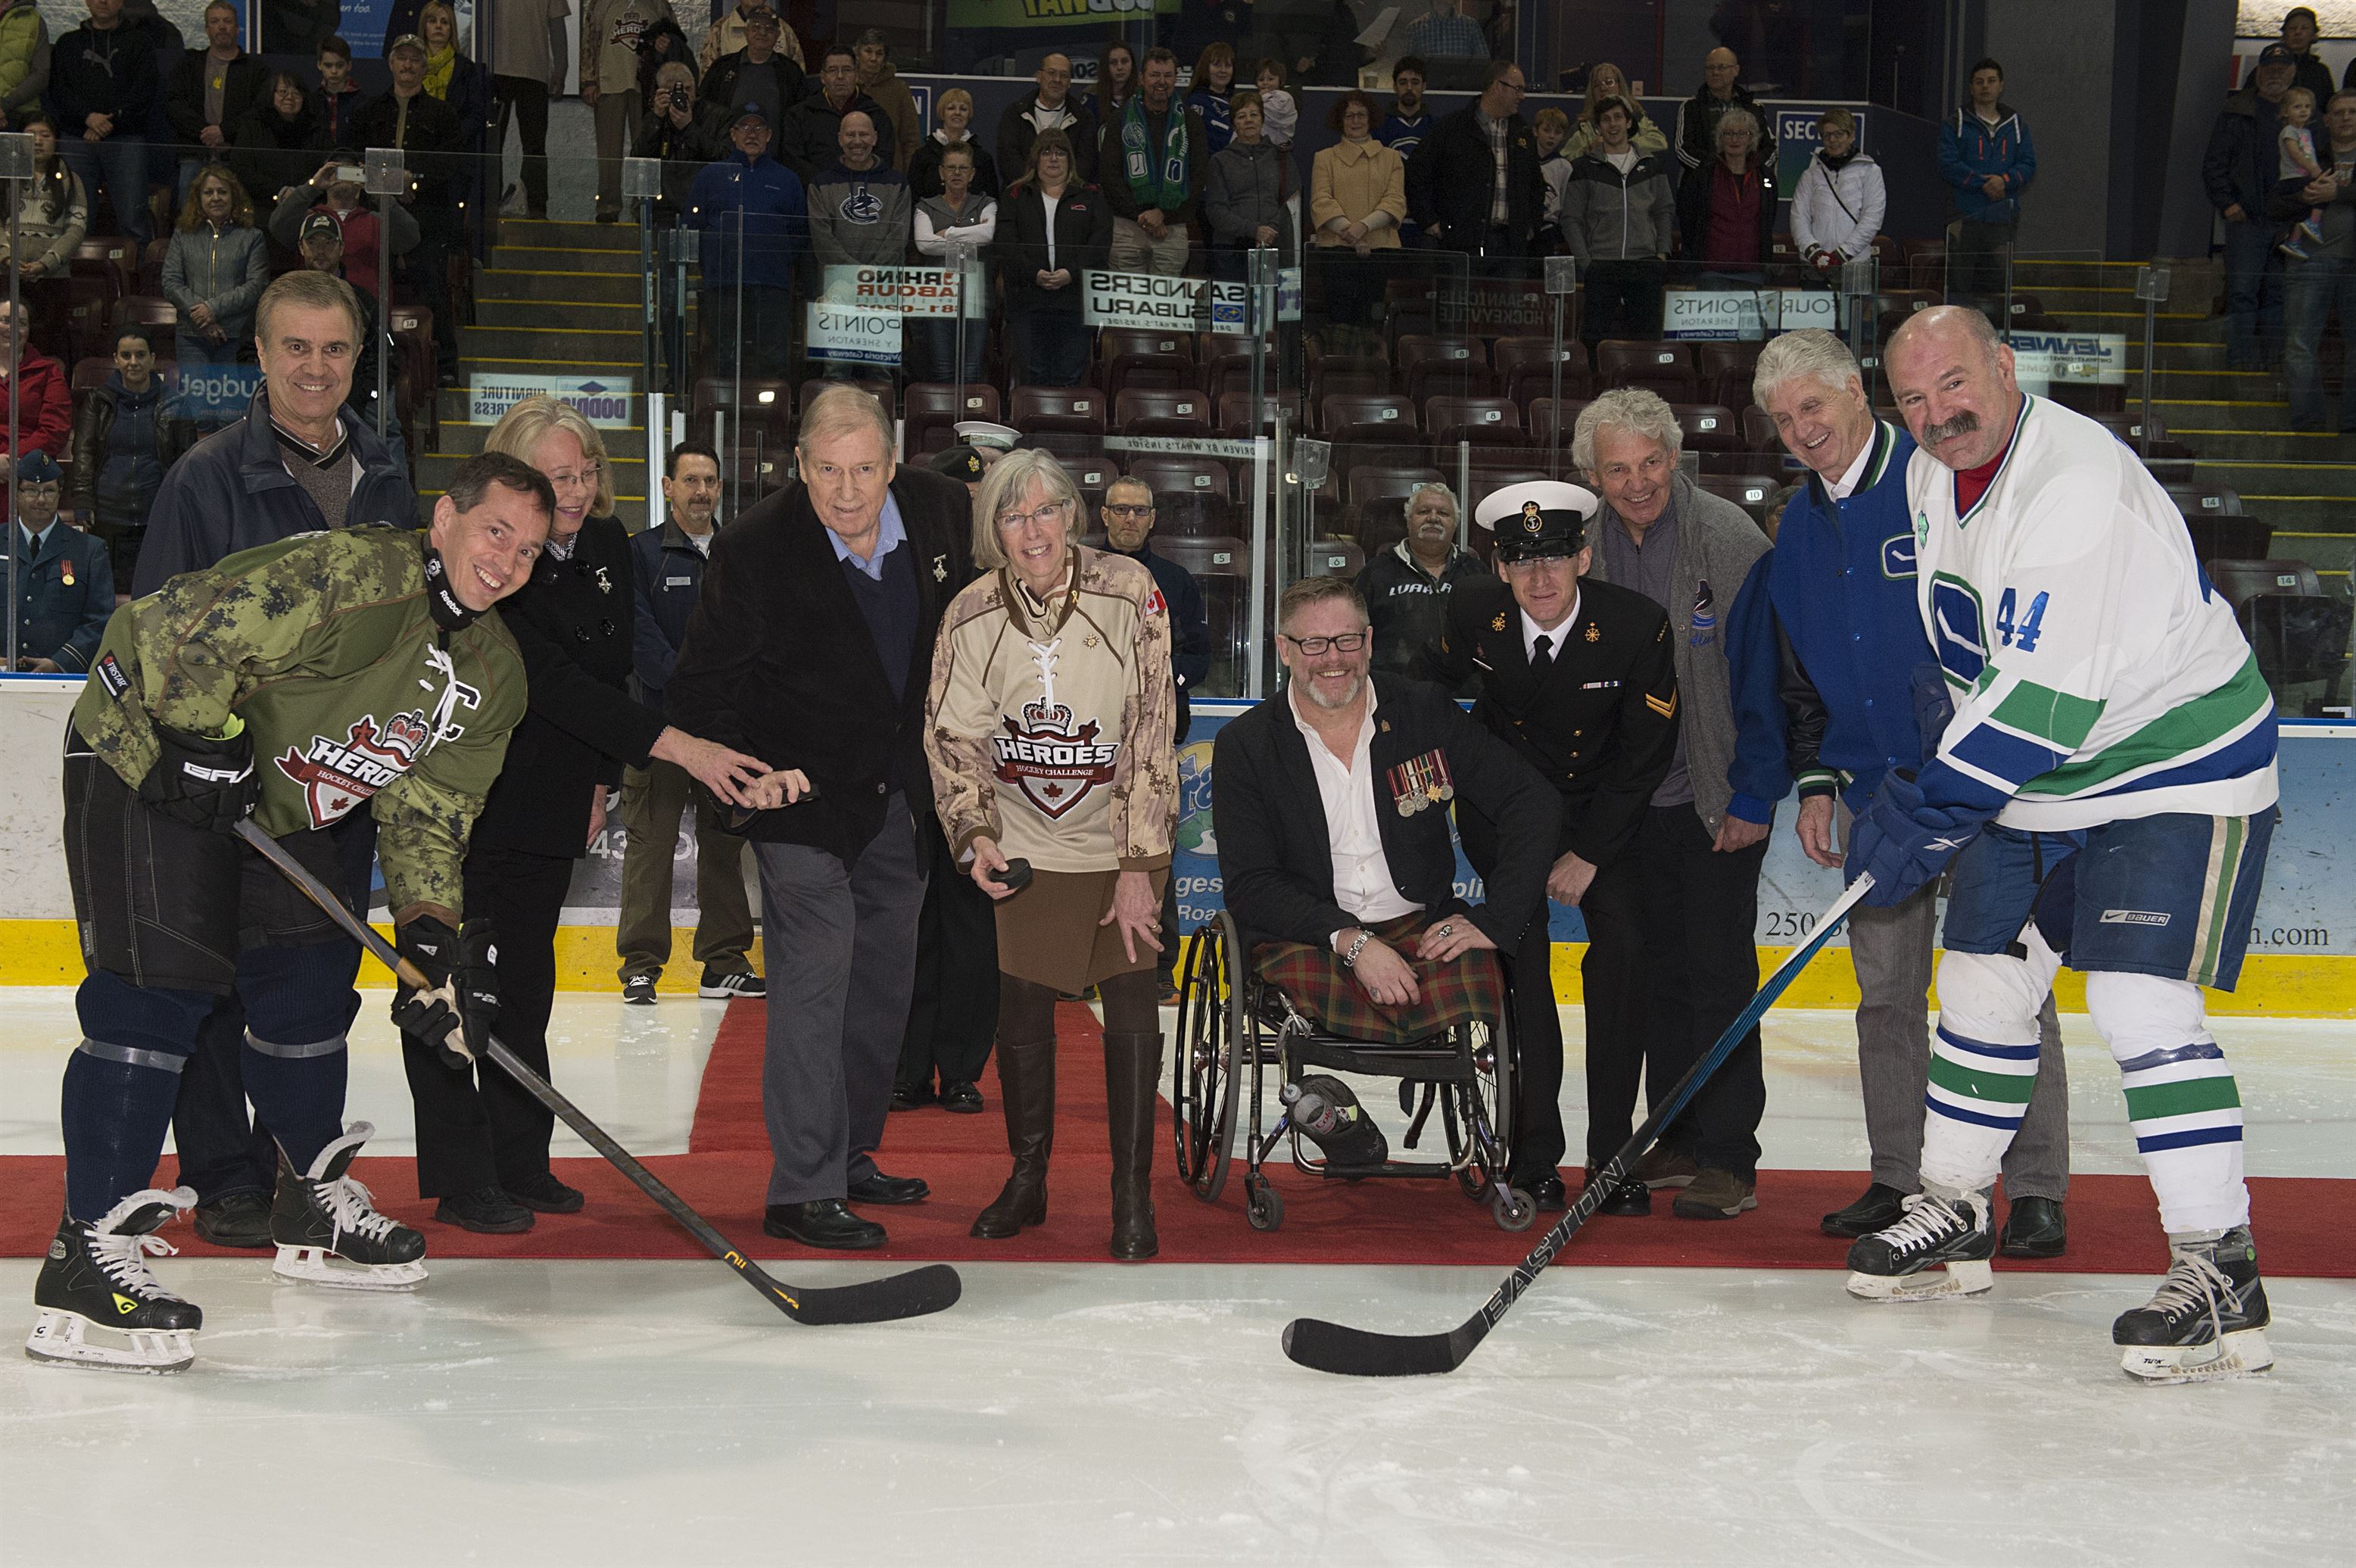 Puck drop at Vancouver Canucks Alumni and members of the Canadian Armed Forces game